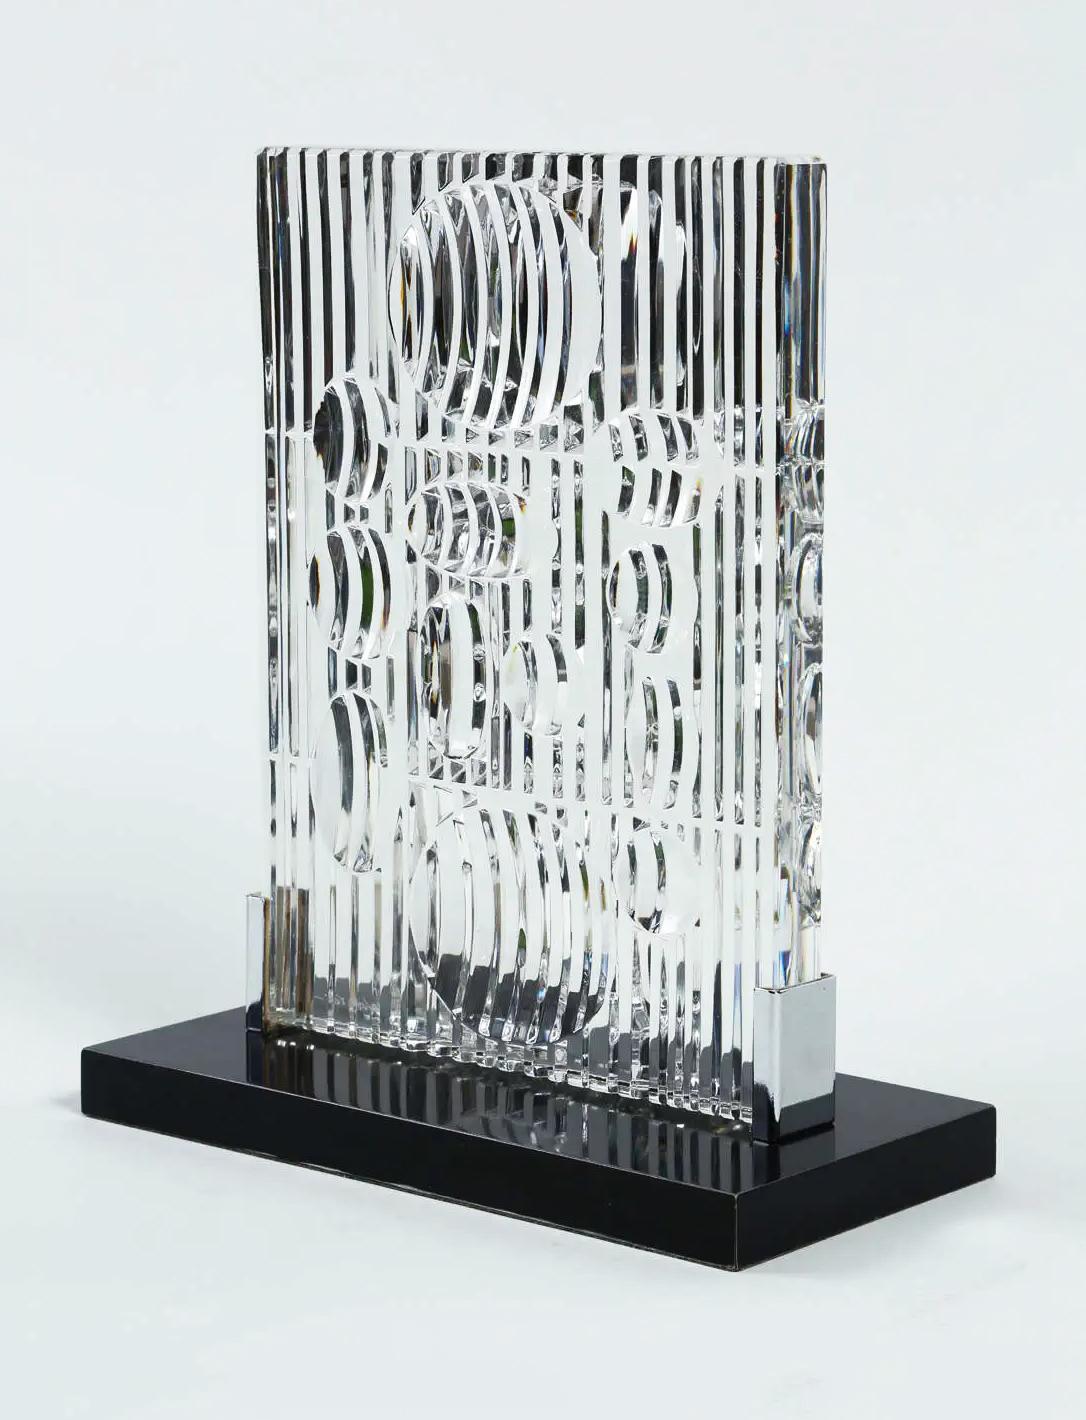 EREBUS (CRYSTAL SCULPTURE) - Sculpture by Victor Vasarely